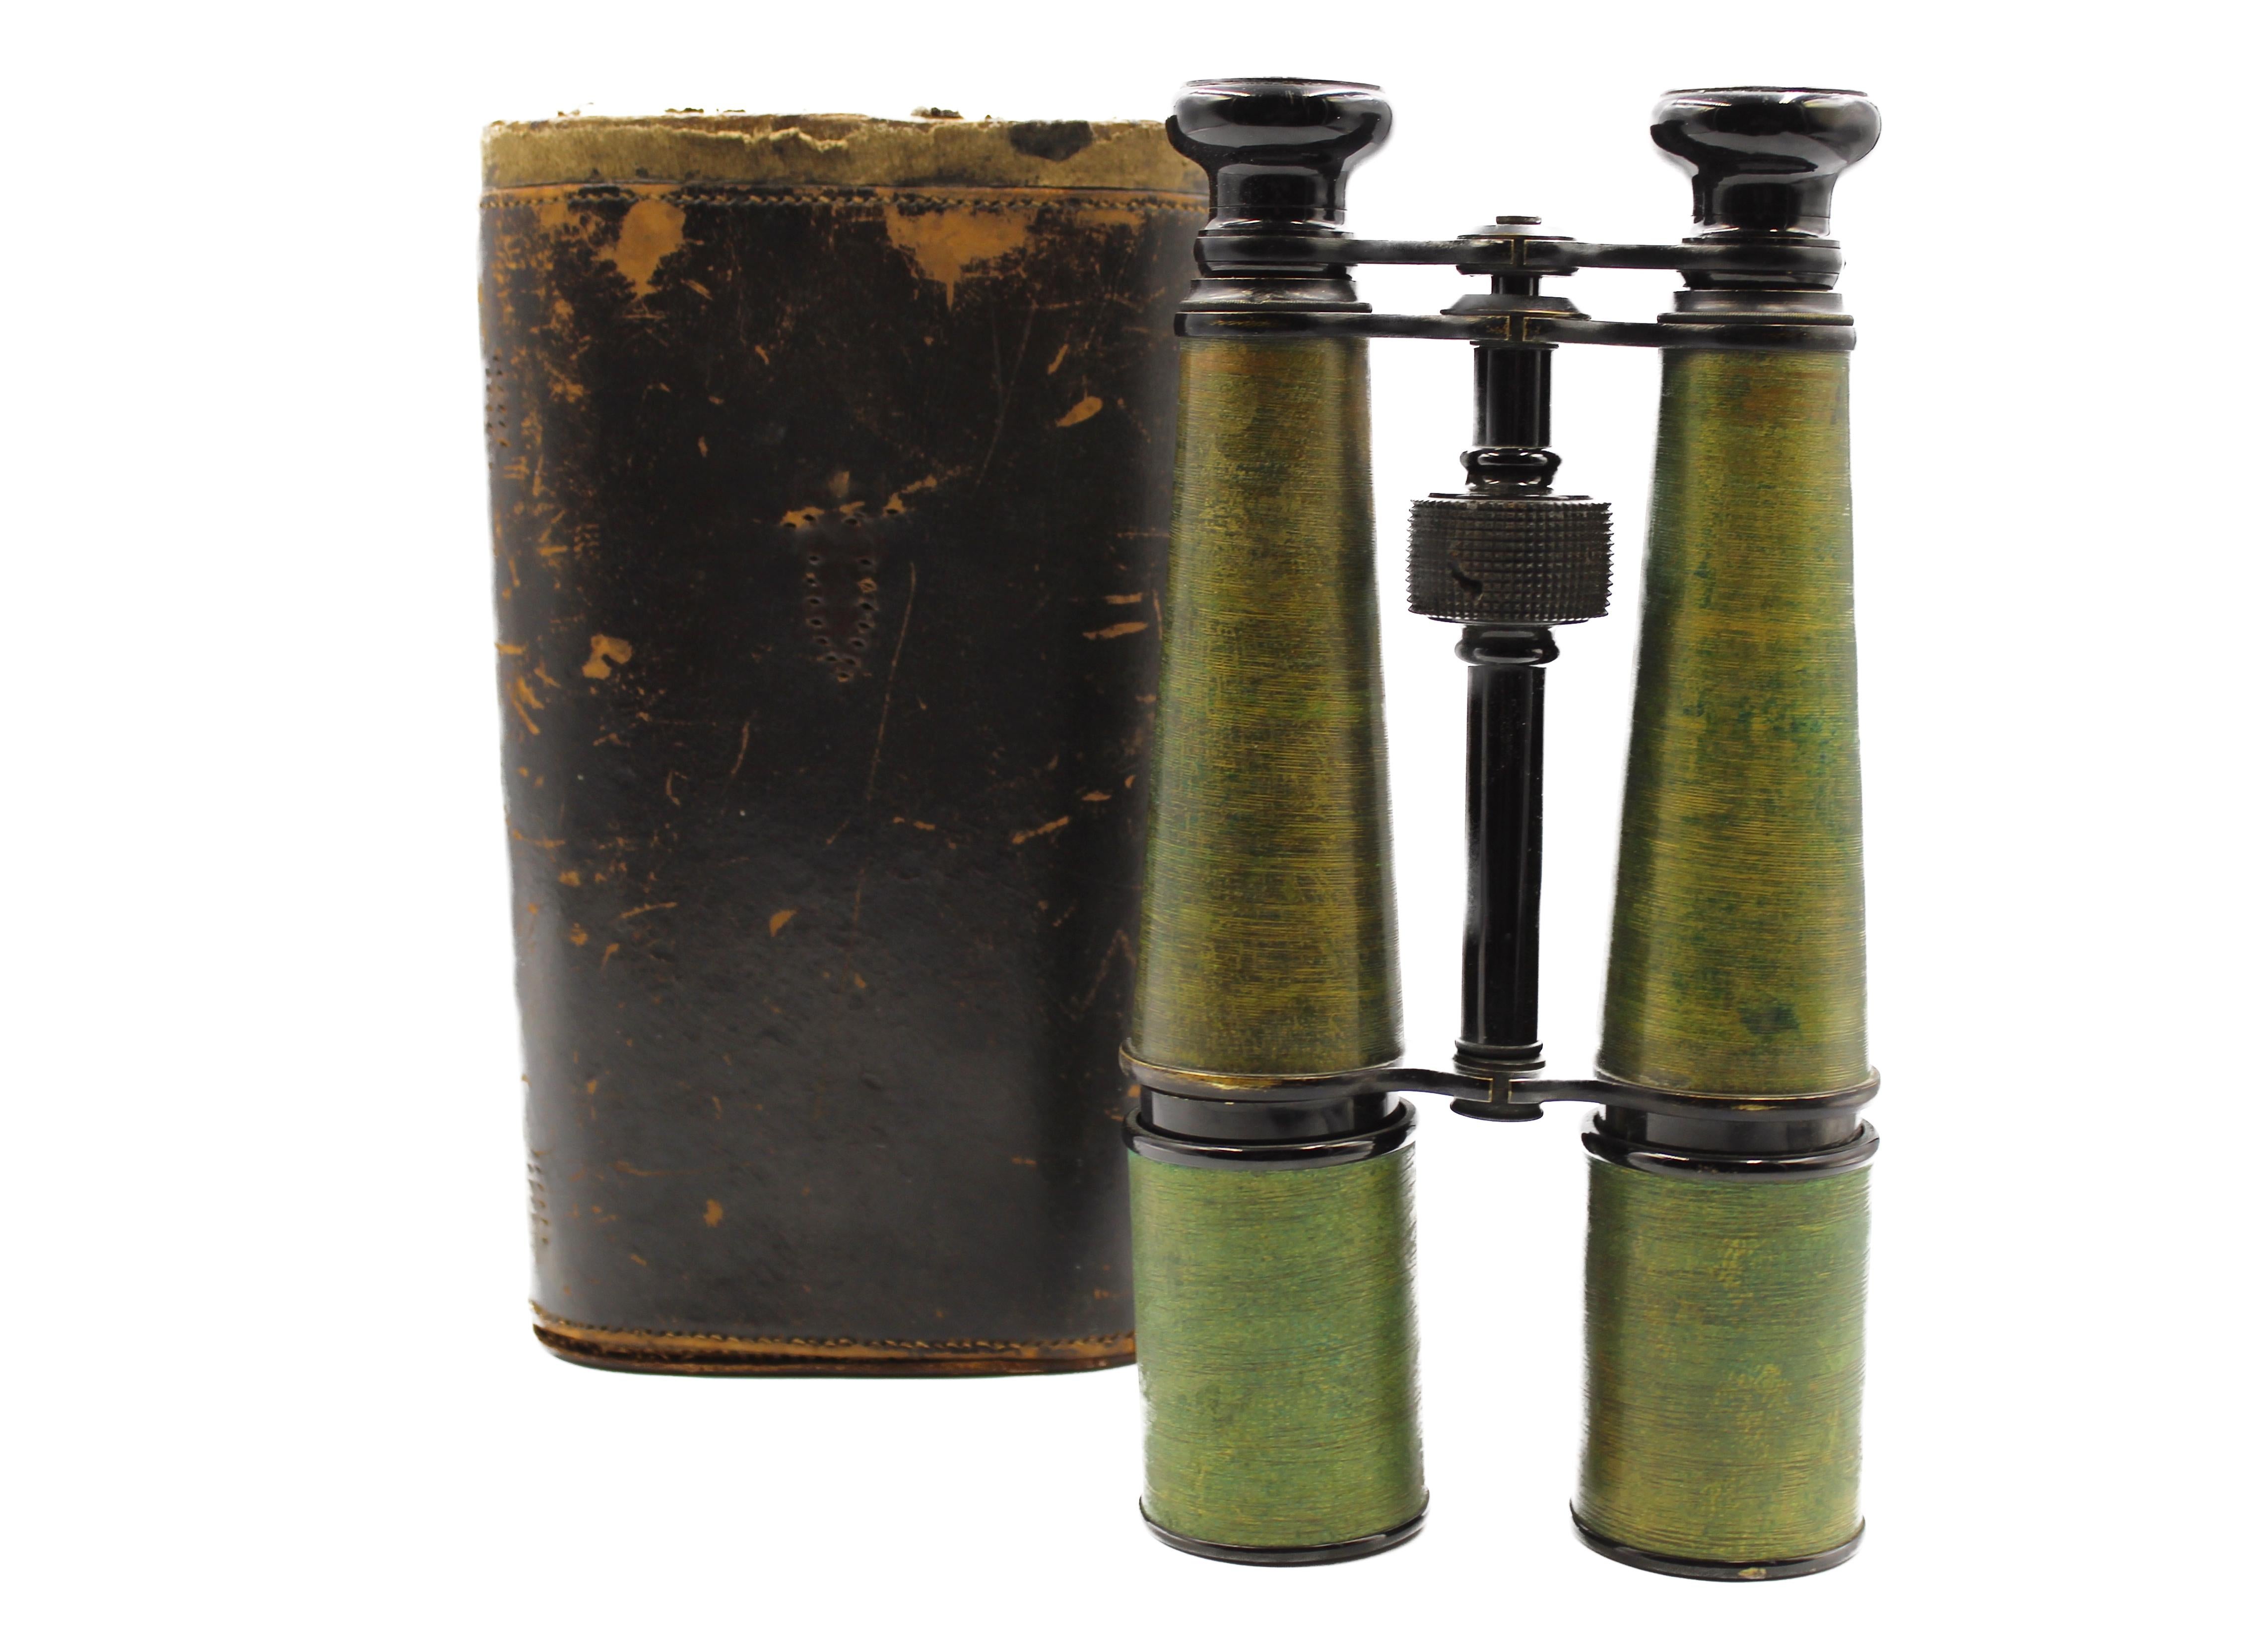 Mid-19th Century Vintage Civil War Era Field Glasses by Queen & Co.